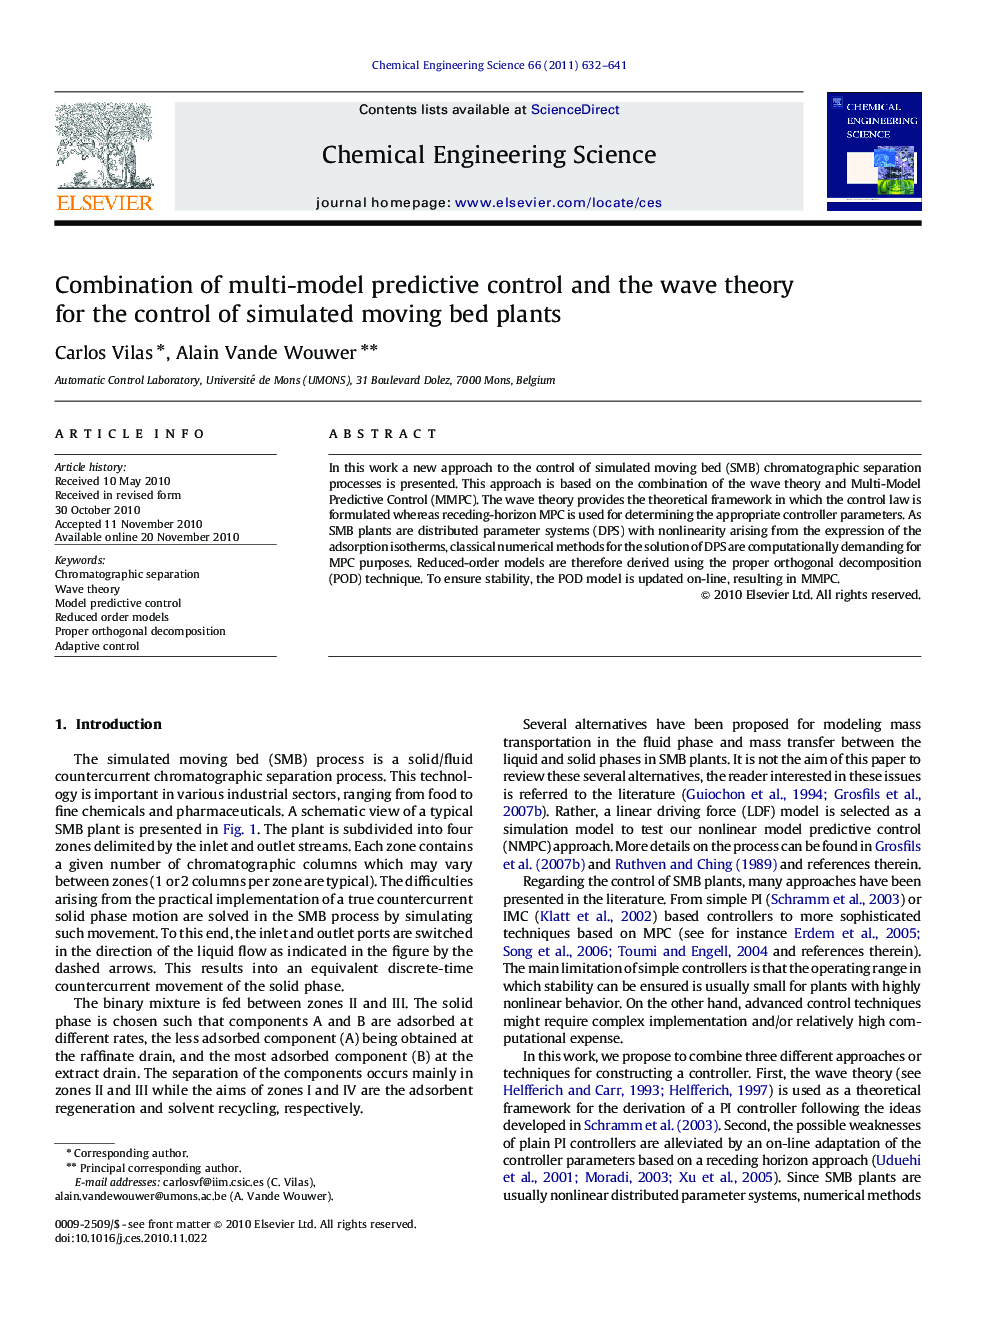 Combination of multi-model predictive control and the wave theory for the control of simulated moving bed plants